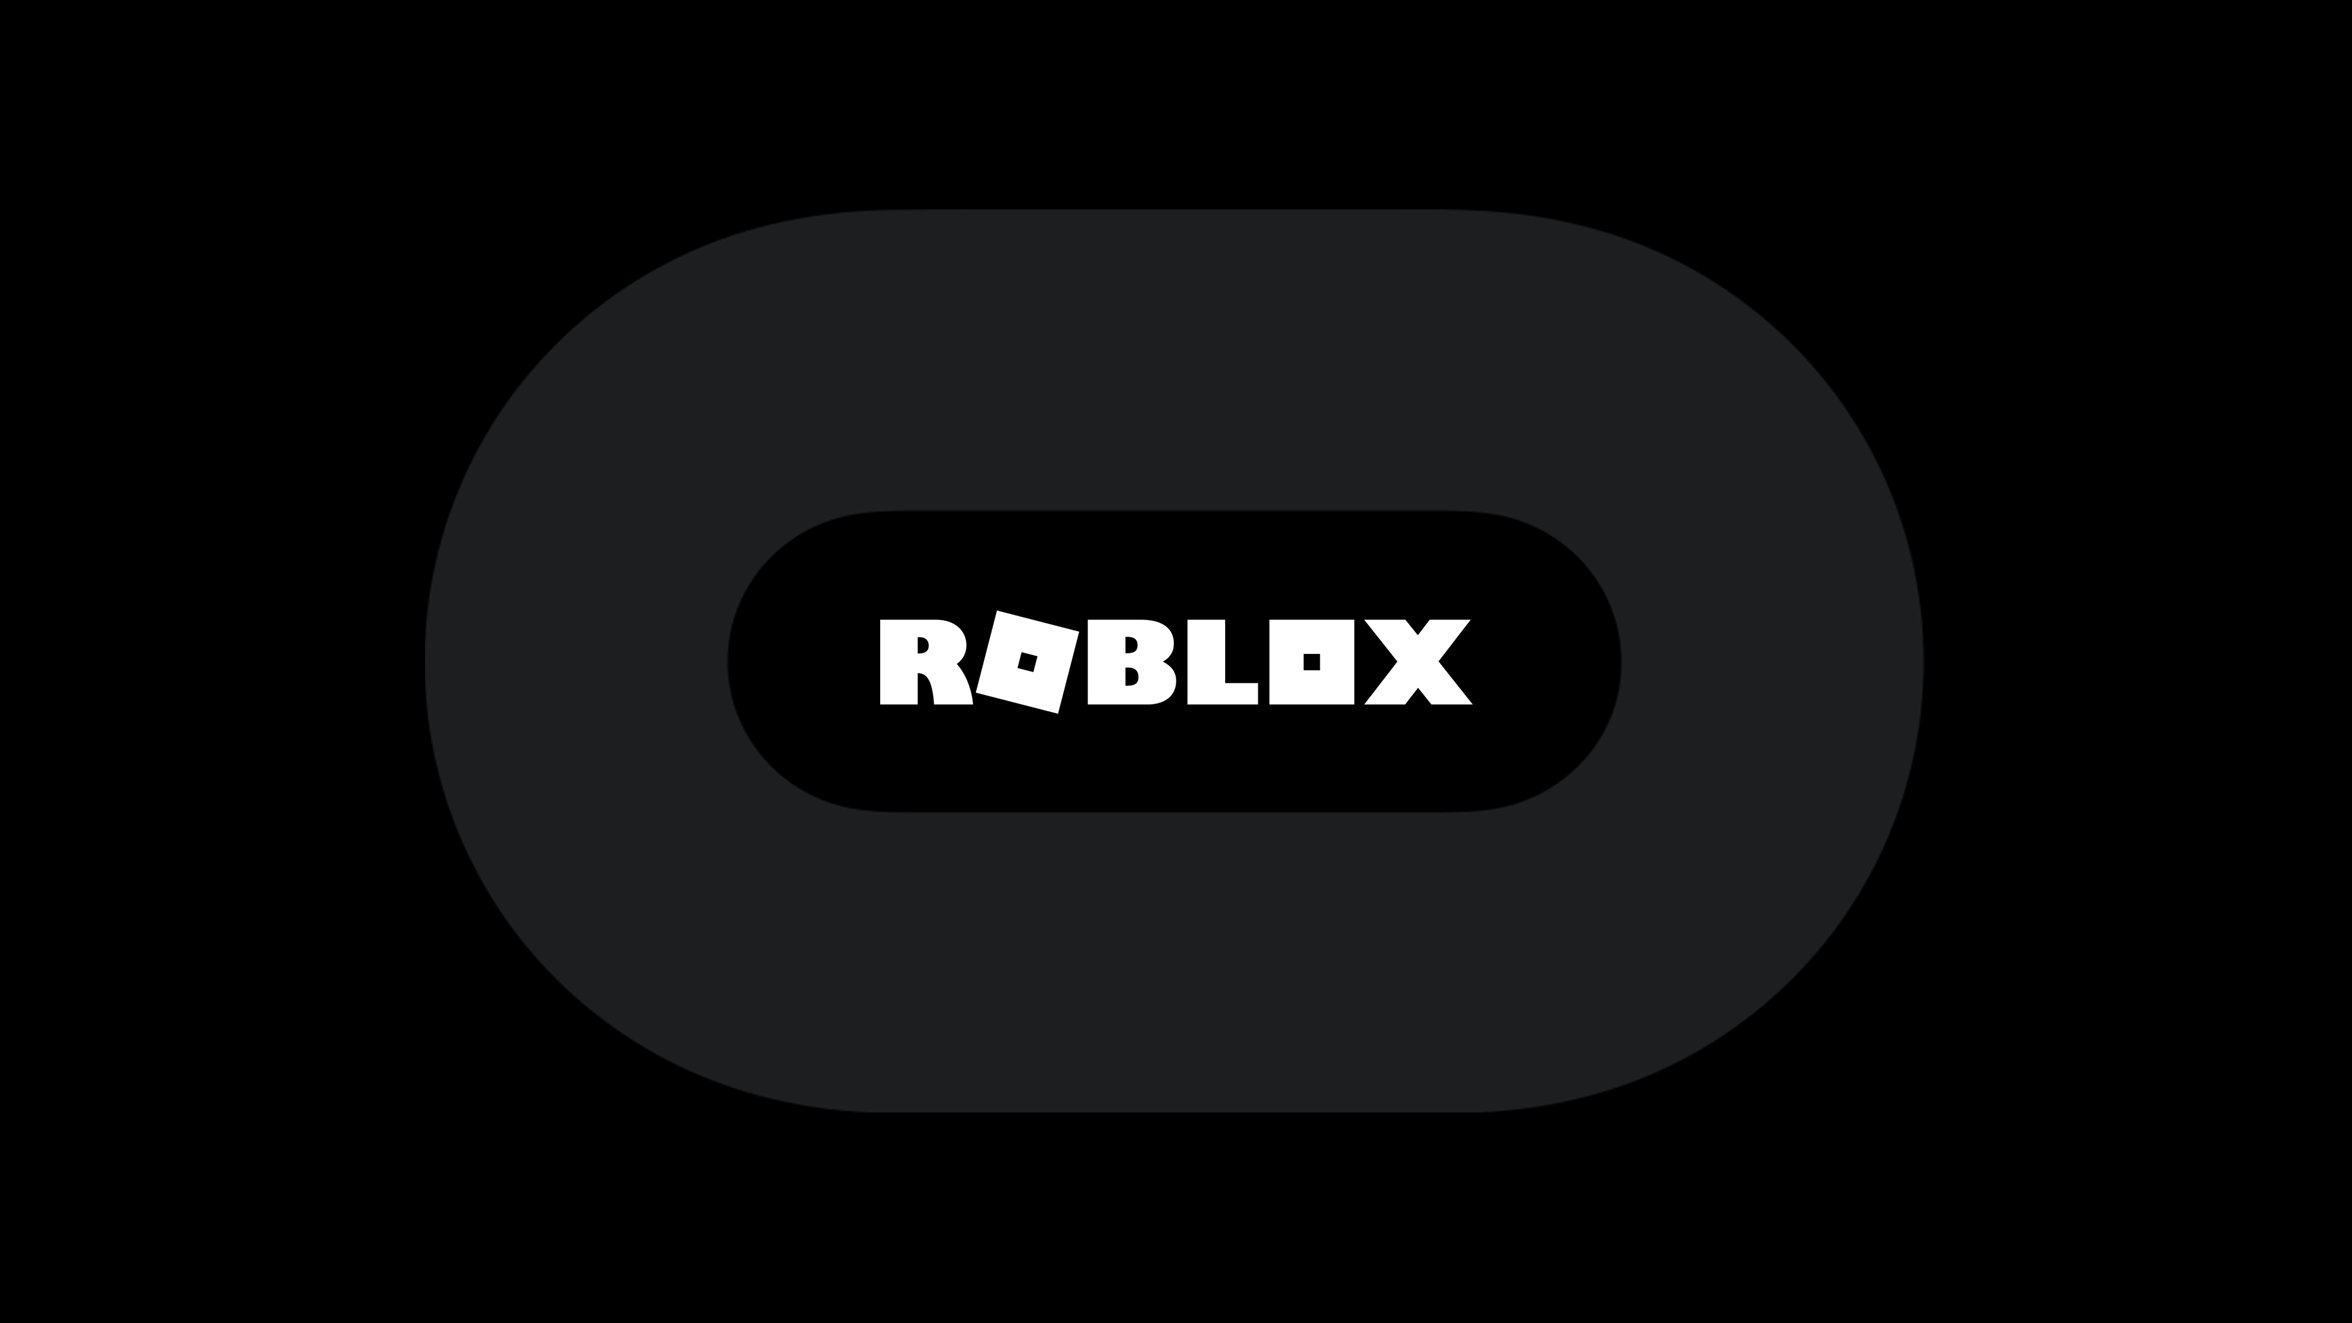 What VR headsets work with Roblox in July 2021?